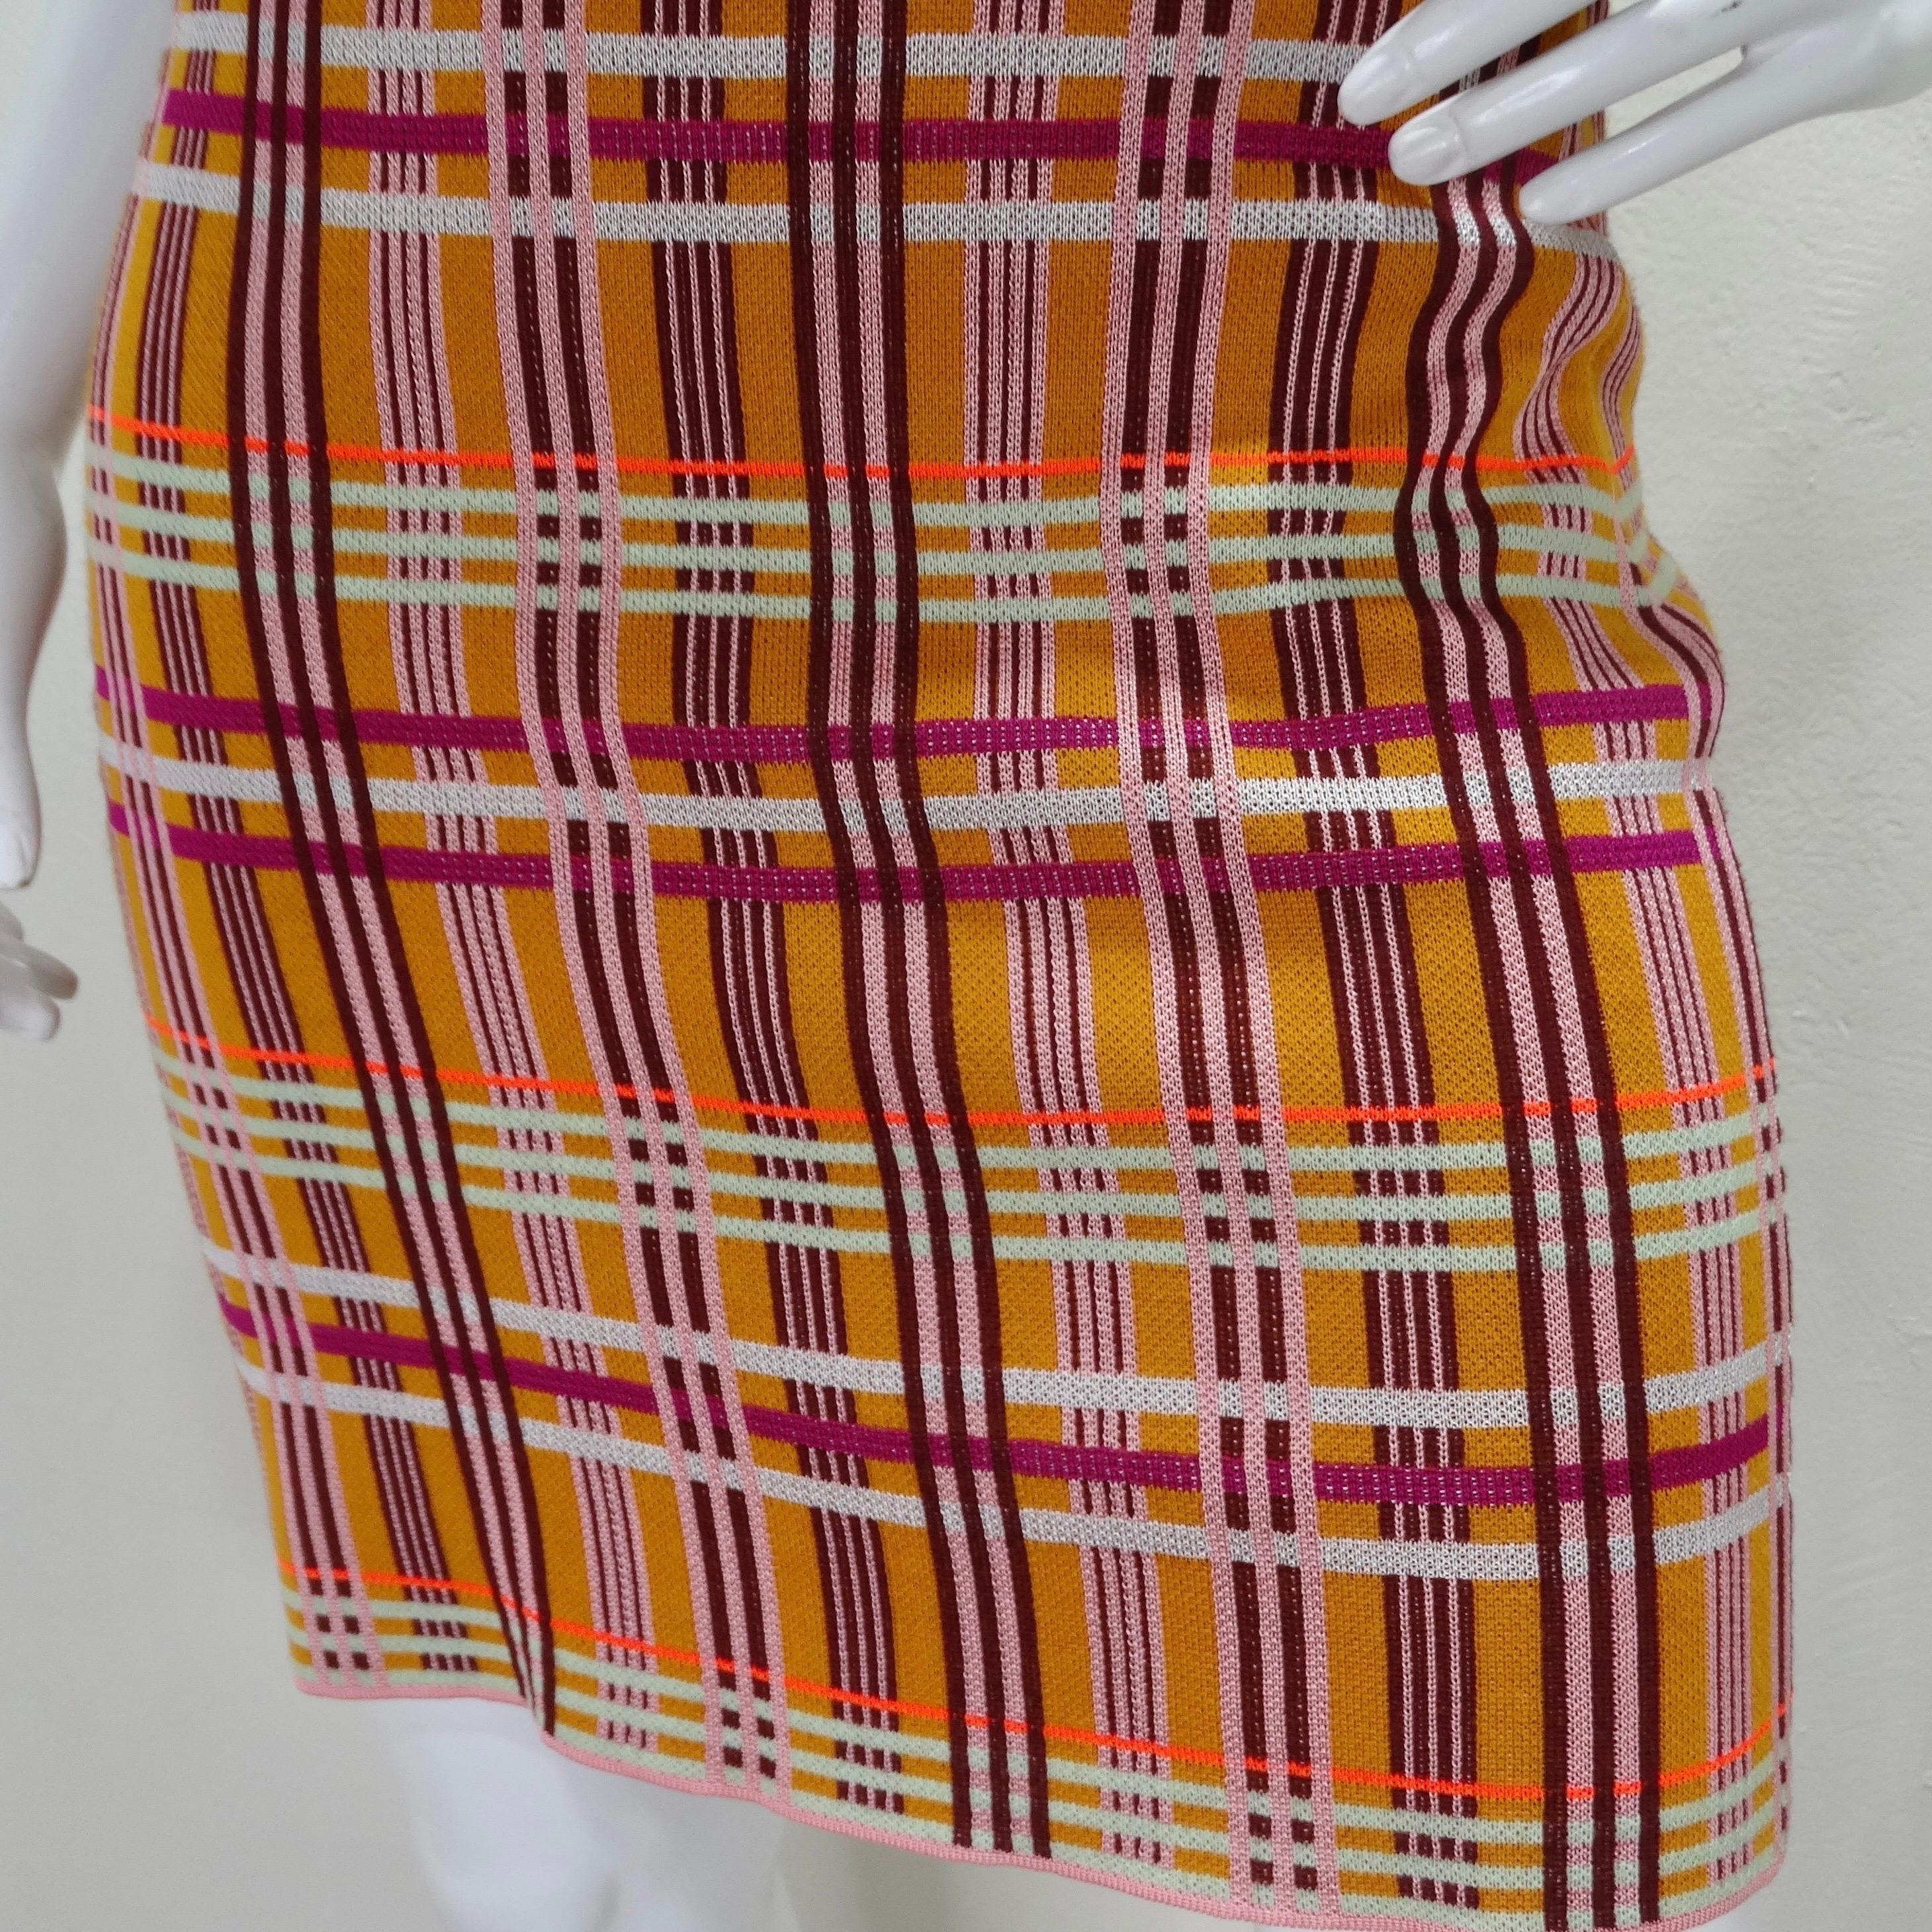 This Missoni pencil skirt is going to become your next go-to skirt you can't stop reaching for! How adorable is this Missoni AW21 plaid pencil skirt?! Missoni presents their signature knit this time in an incredible plaid pattern compromised of